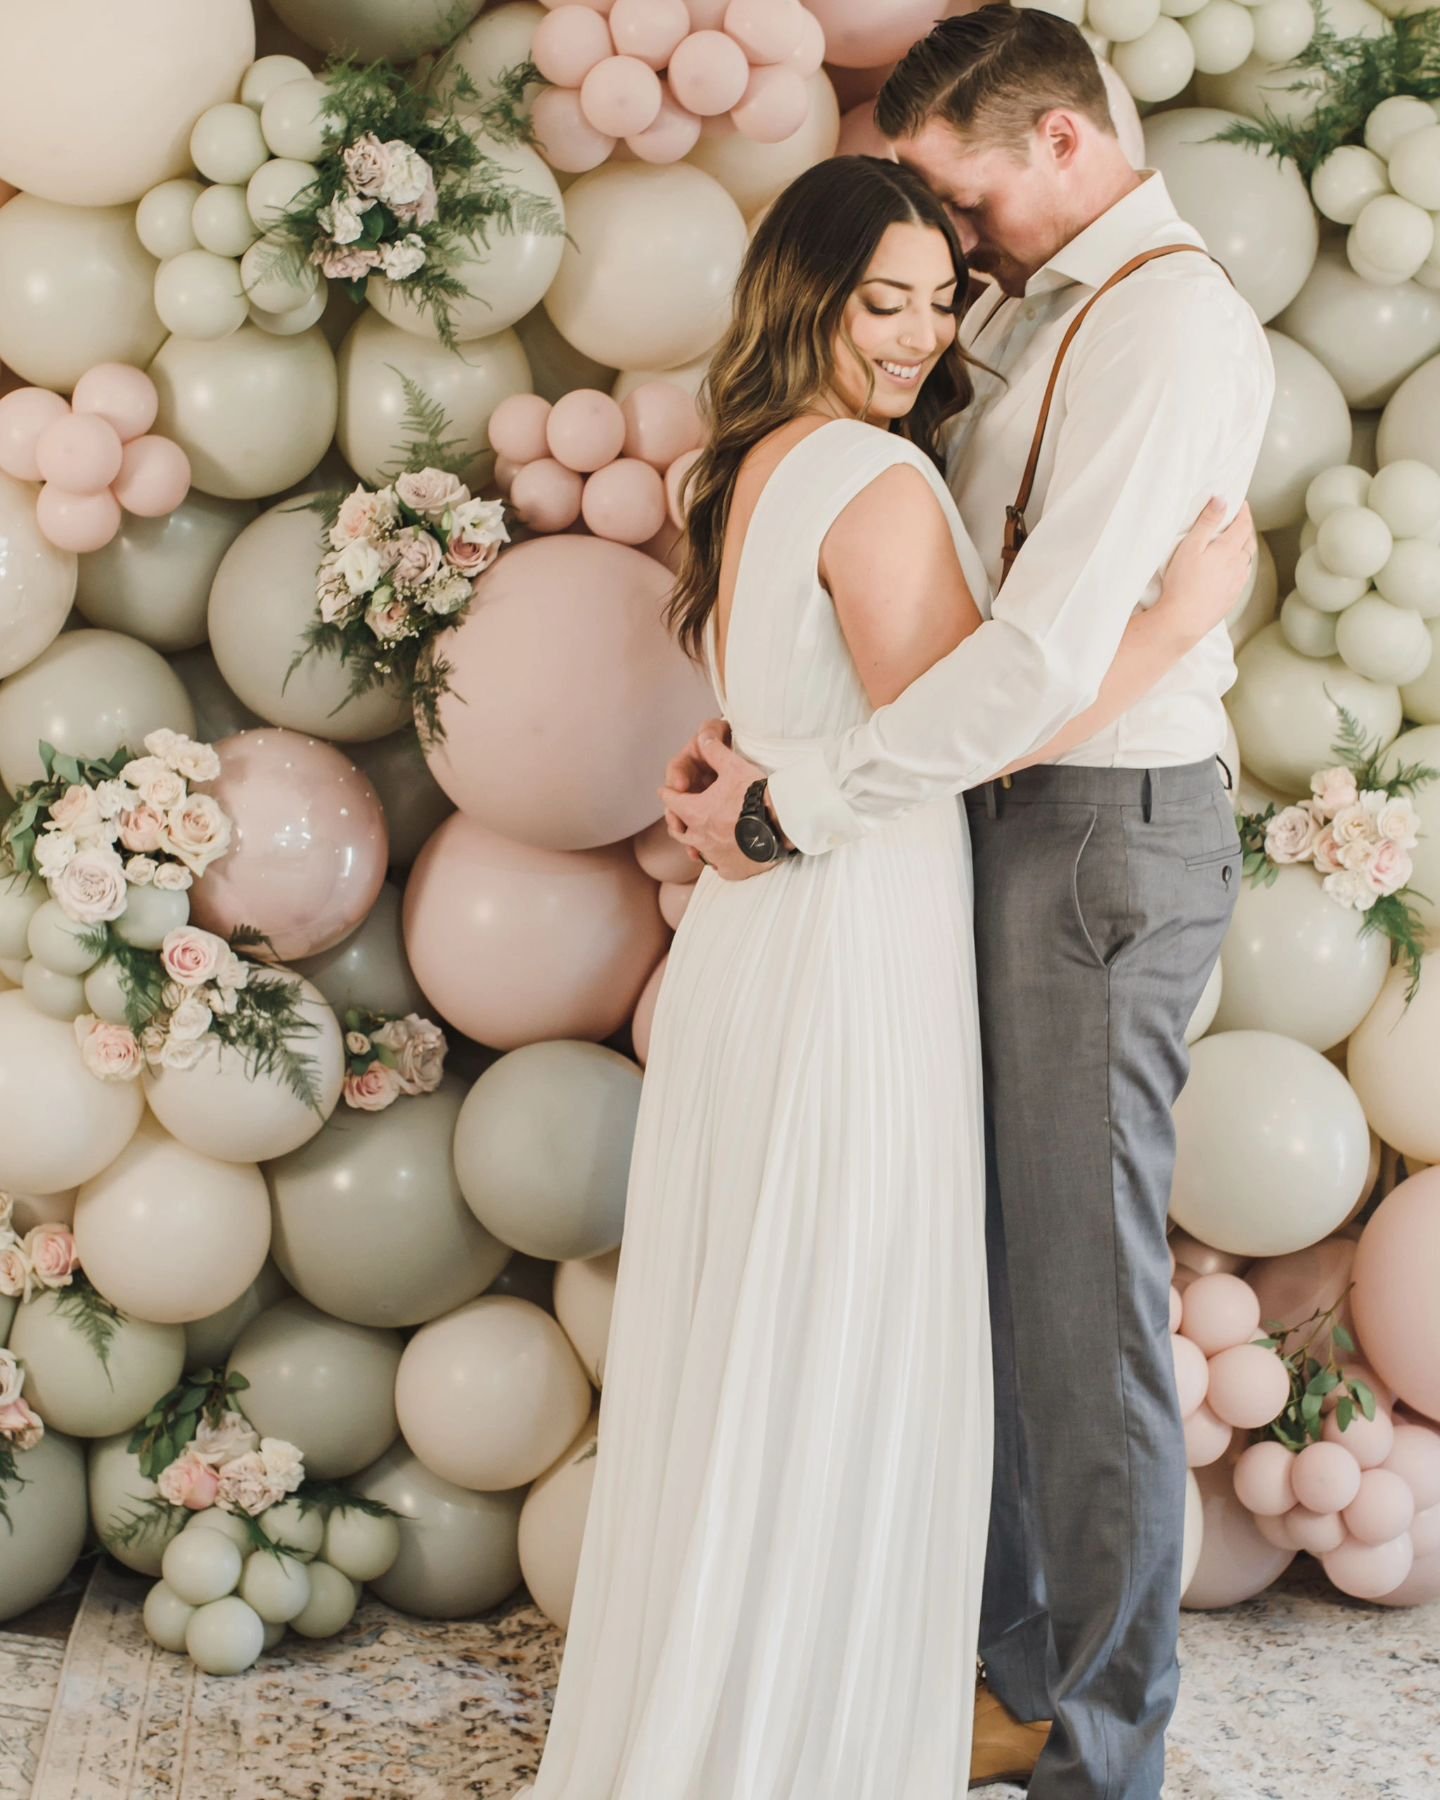 What a fun yet elegant way to add decor to your wedding day. Incorporating your color palette with balloons, adding a soft touch of florals for a  romantic feel. 

This ballon and floral wall can be created as the perfect backdrop for your sweetheart